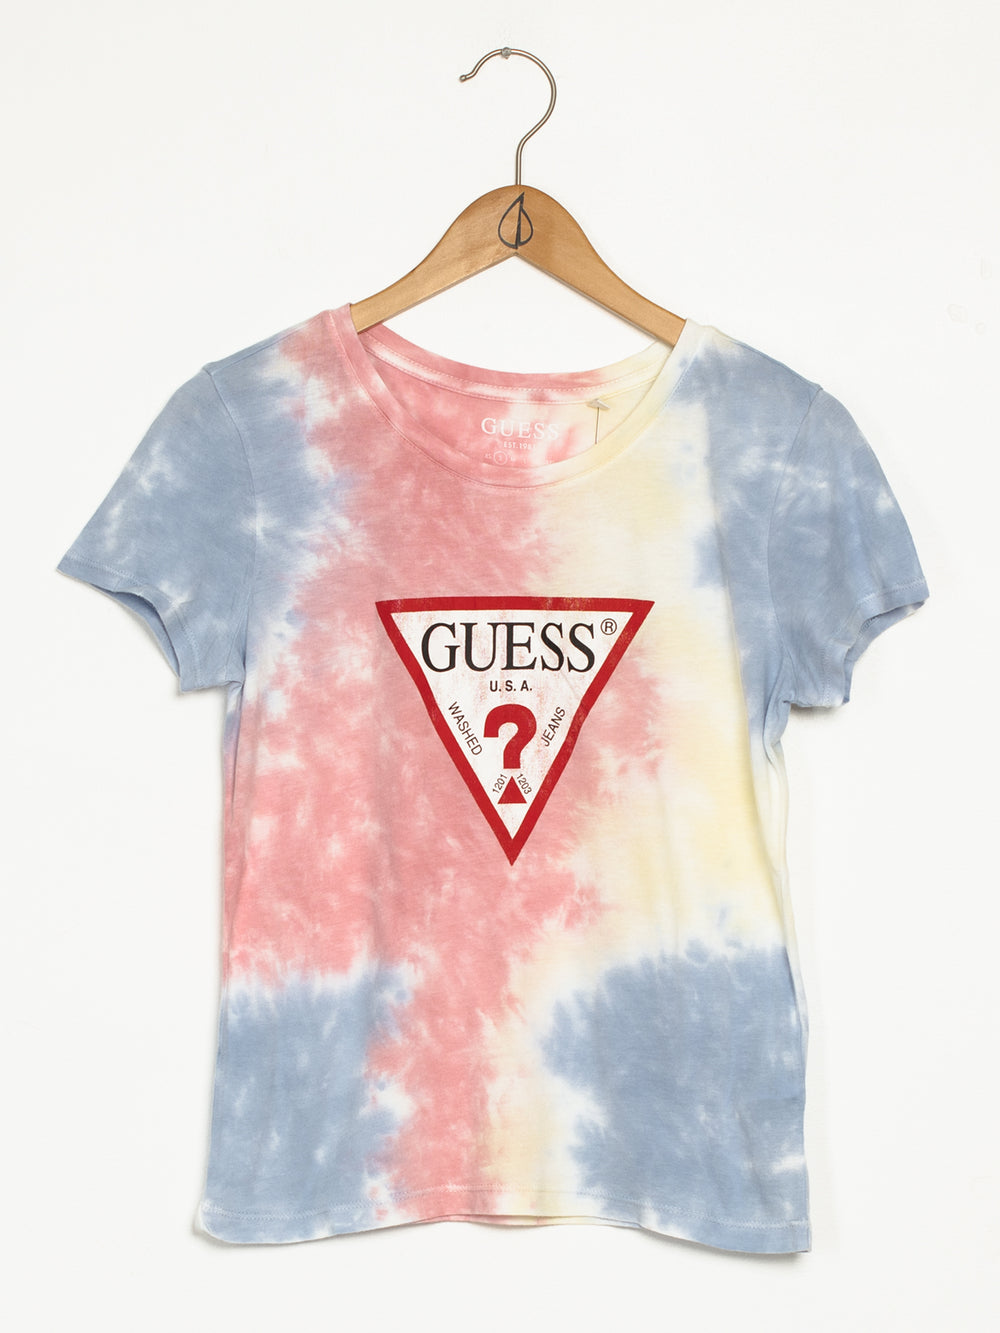 GUESS LOGO BABY T-SHIRT  - CLEARANCE